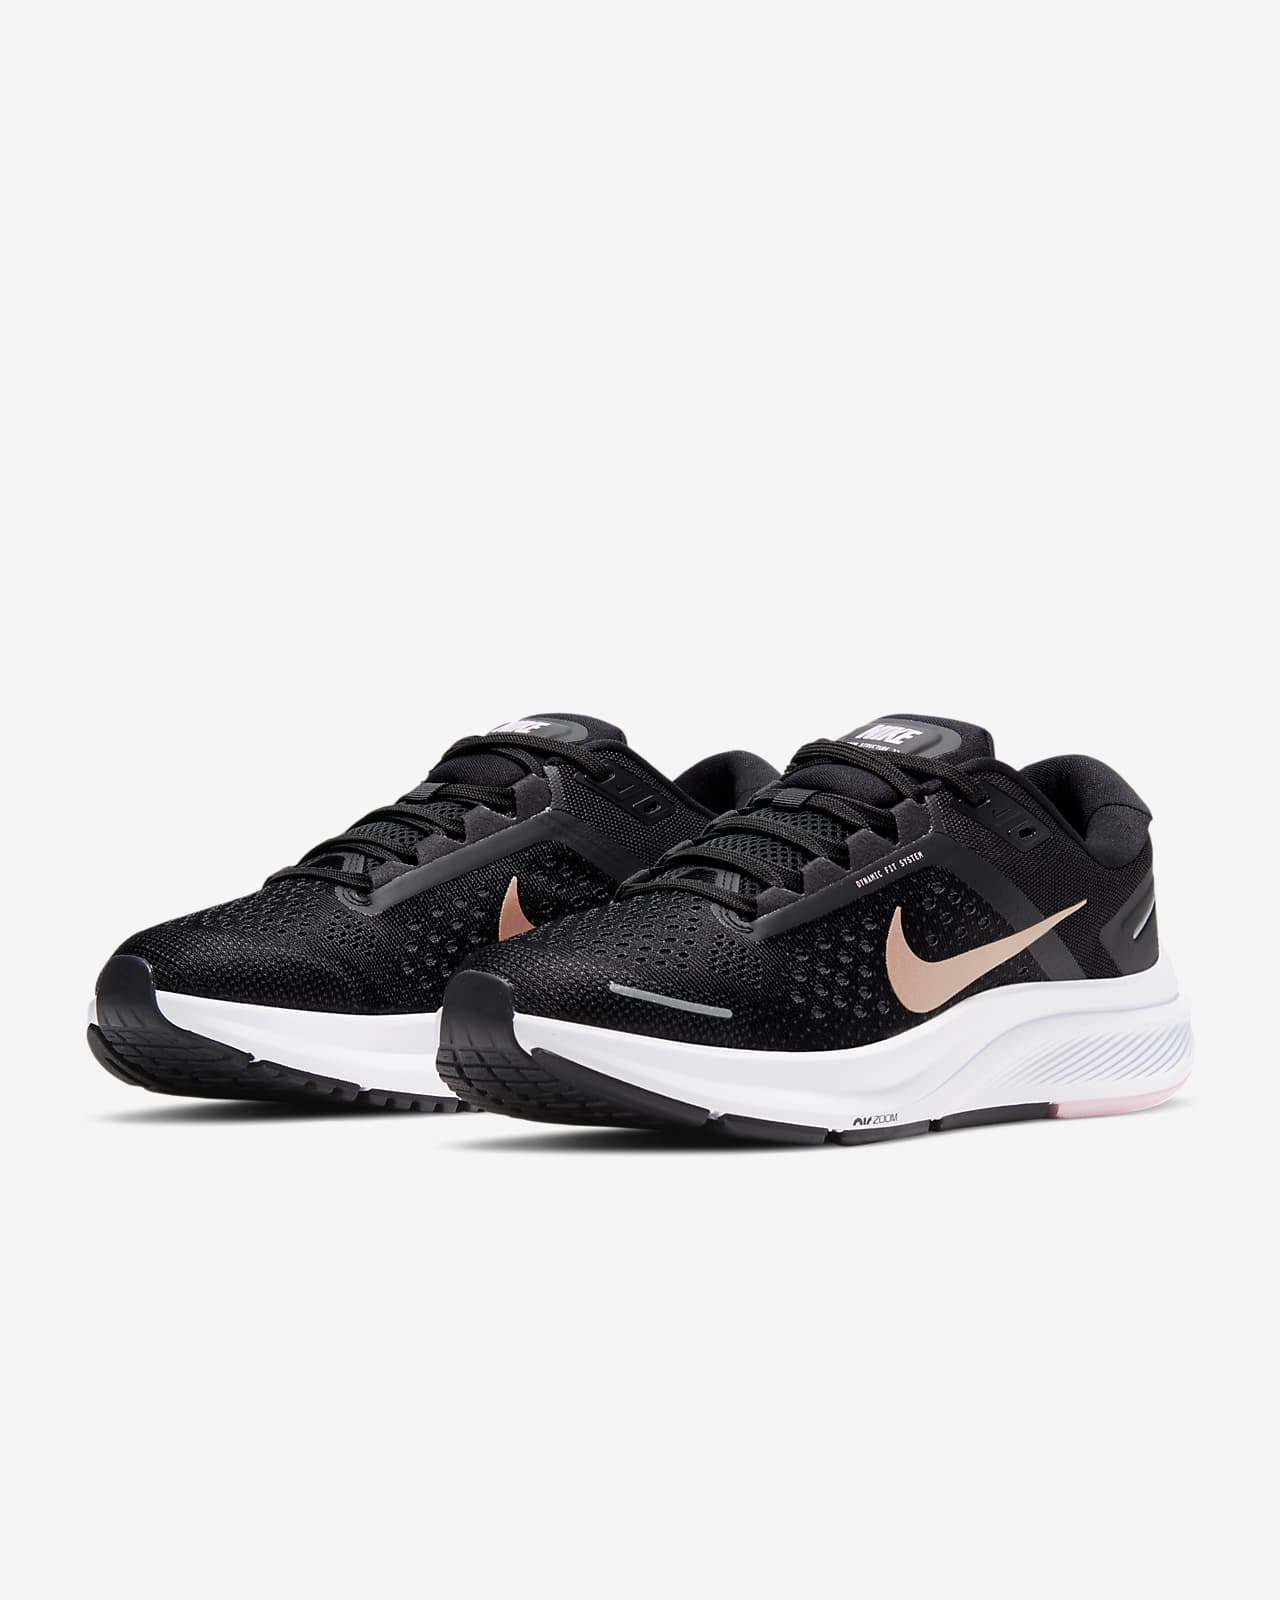 nike zoom structure nz